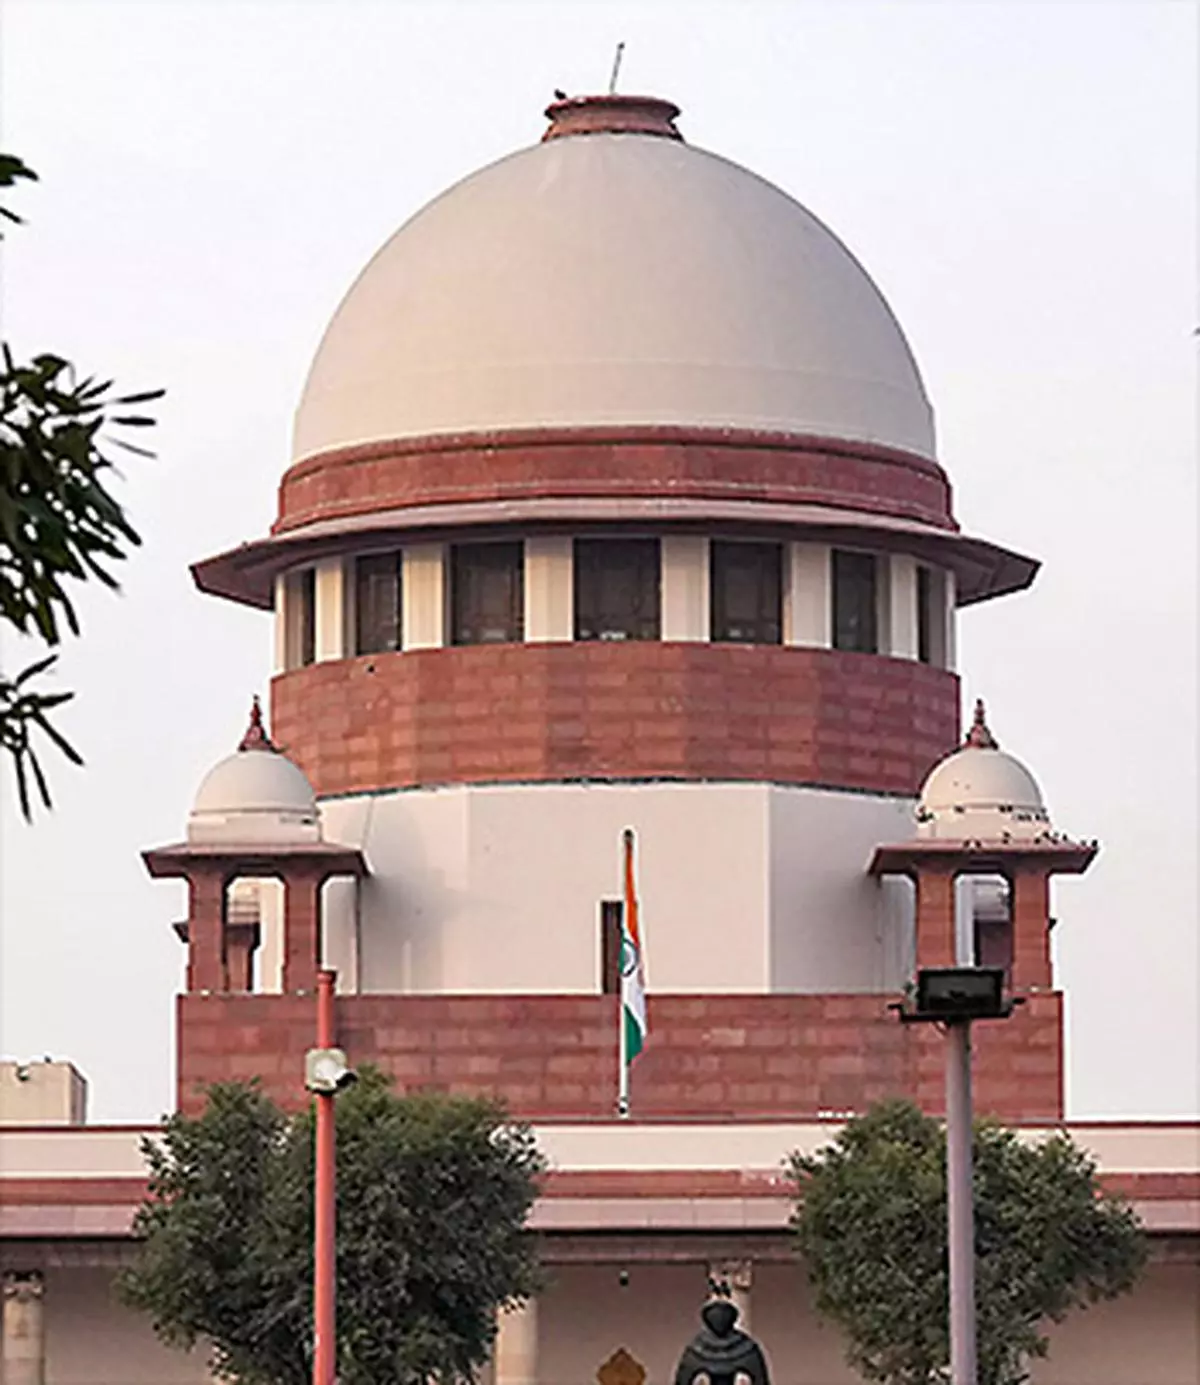 The NCLAT order has been passed without considering the applicability of the Section 26(8) in the present matter, CCI’s counsel submitted before the apex court